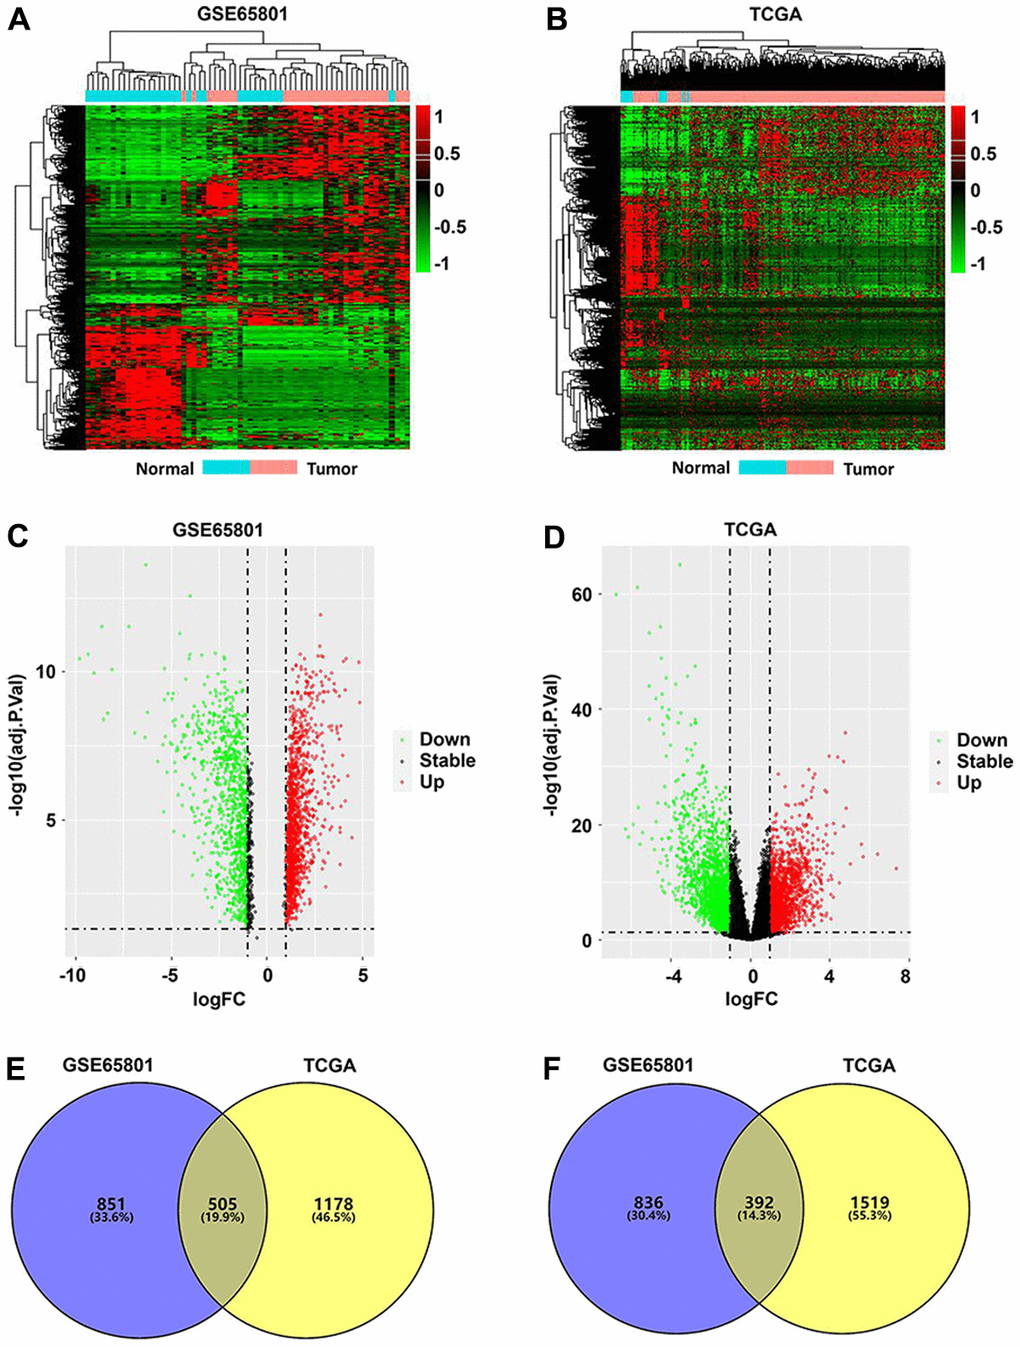 Identification of differentially expressed genes (DEGs) in GC. (A, B) DEG heatmaps of GC and normal tissues from the GSE65801 (A) and TCGA (B) datasets. (C, D) DEG volcano plots of GC and normal tissues from the GSE65801 (C) and TCGA (D) datasets. (E, F) Venn diagram showing the up- (E) and downregulated overlapping DEGs (F) between the GSE65801 and TCGA datasets. DEGs, differentially expressed genes; FC, fold change; GC, gastric cancer; and TCGA, The Cancer Genome Atlas.